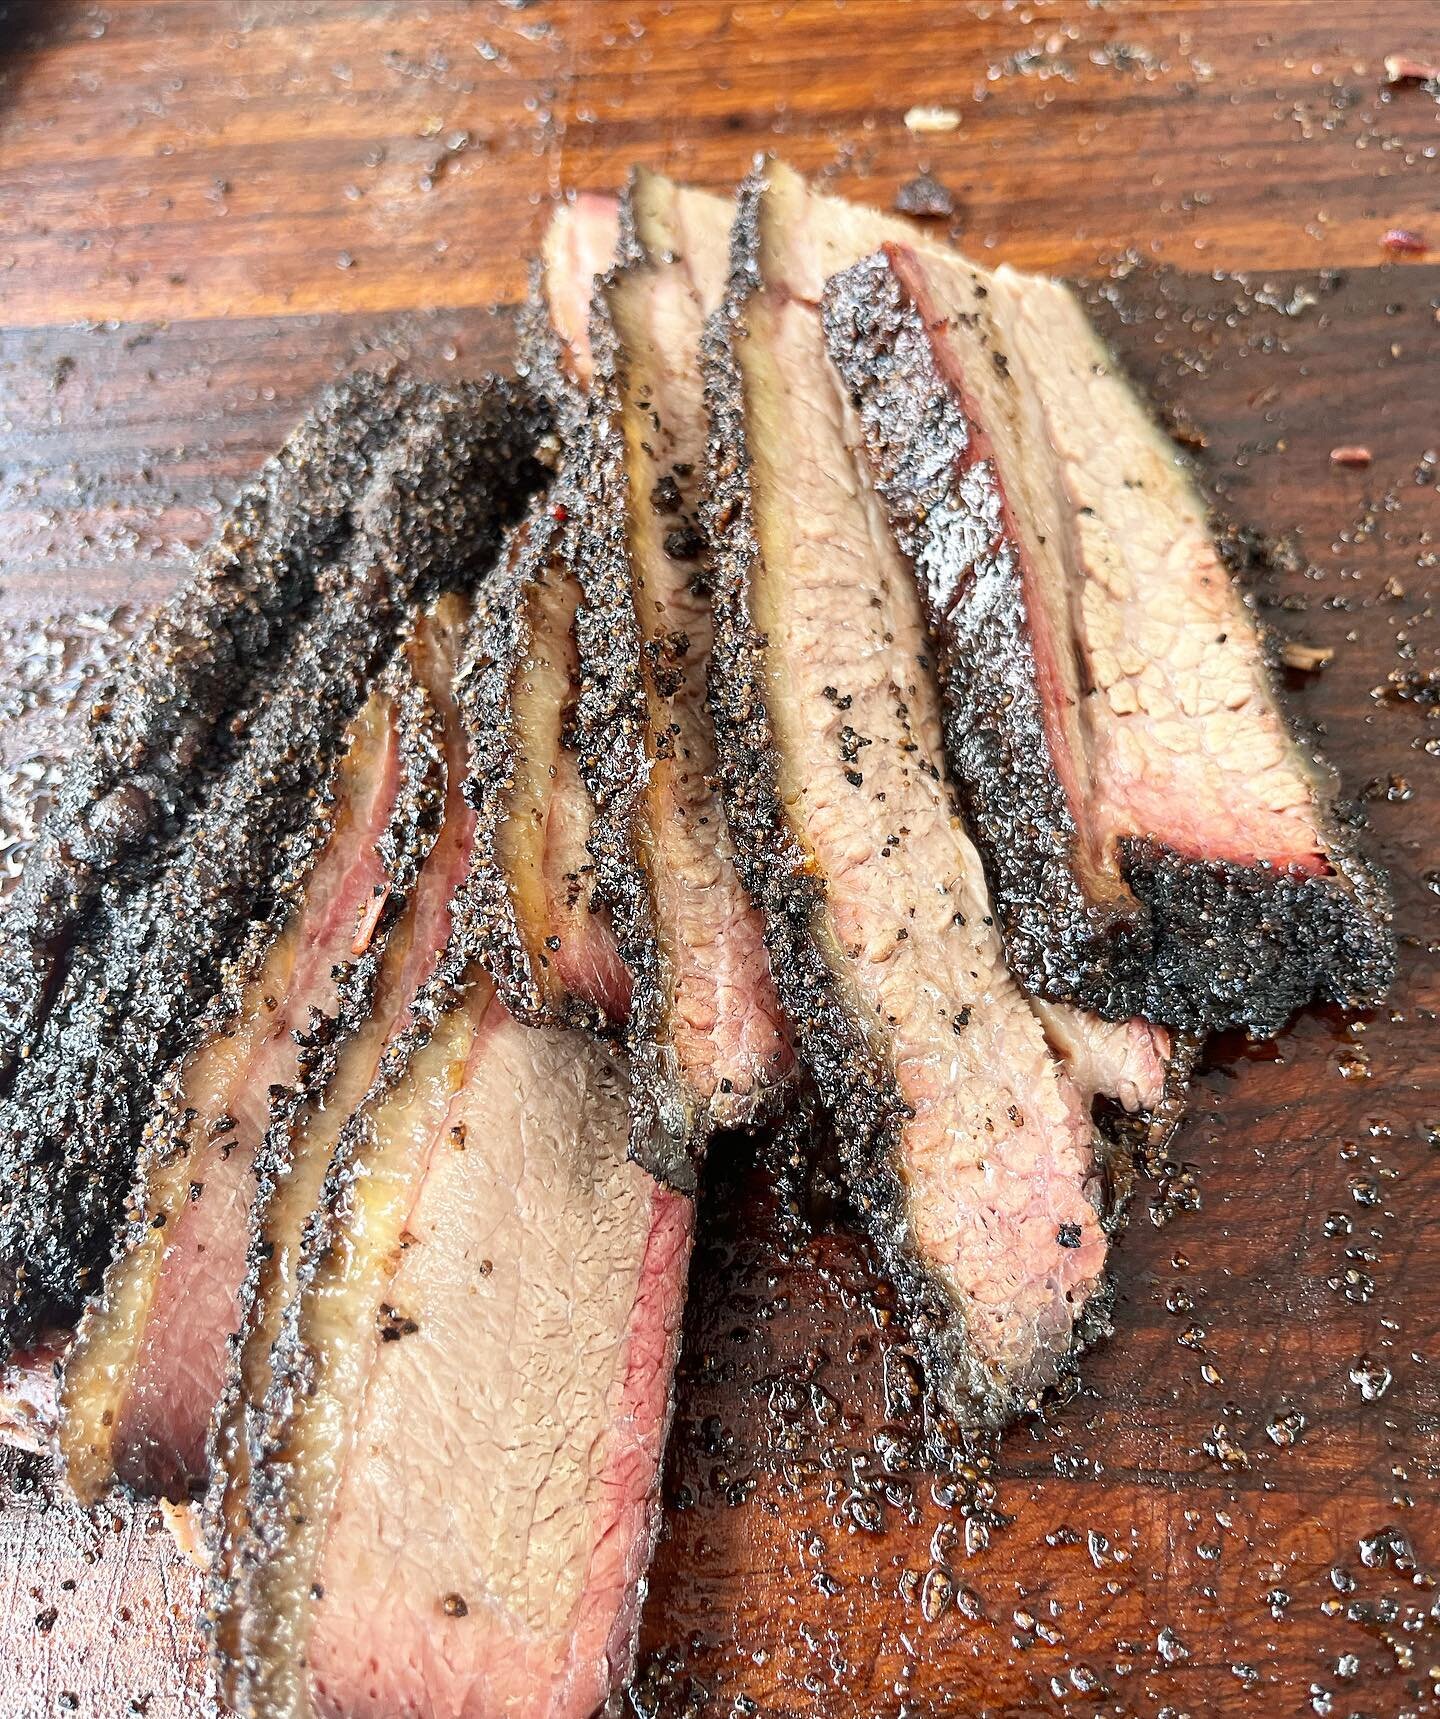 SMOKIN&rsquo; SUNDRIES BBQ MAY 7
11 AM
Out on the Kinship sidewalk
.
Prime @chatelfarms briskets comin&rsquo; atcha VAHI rain or shine! 
.
Remember to throw a few dollars into the @georgiaorganics fund to support our local farmers!